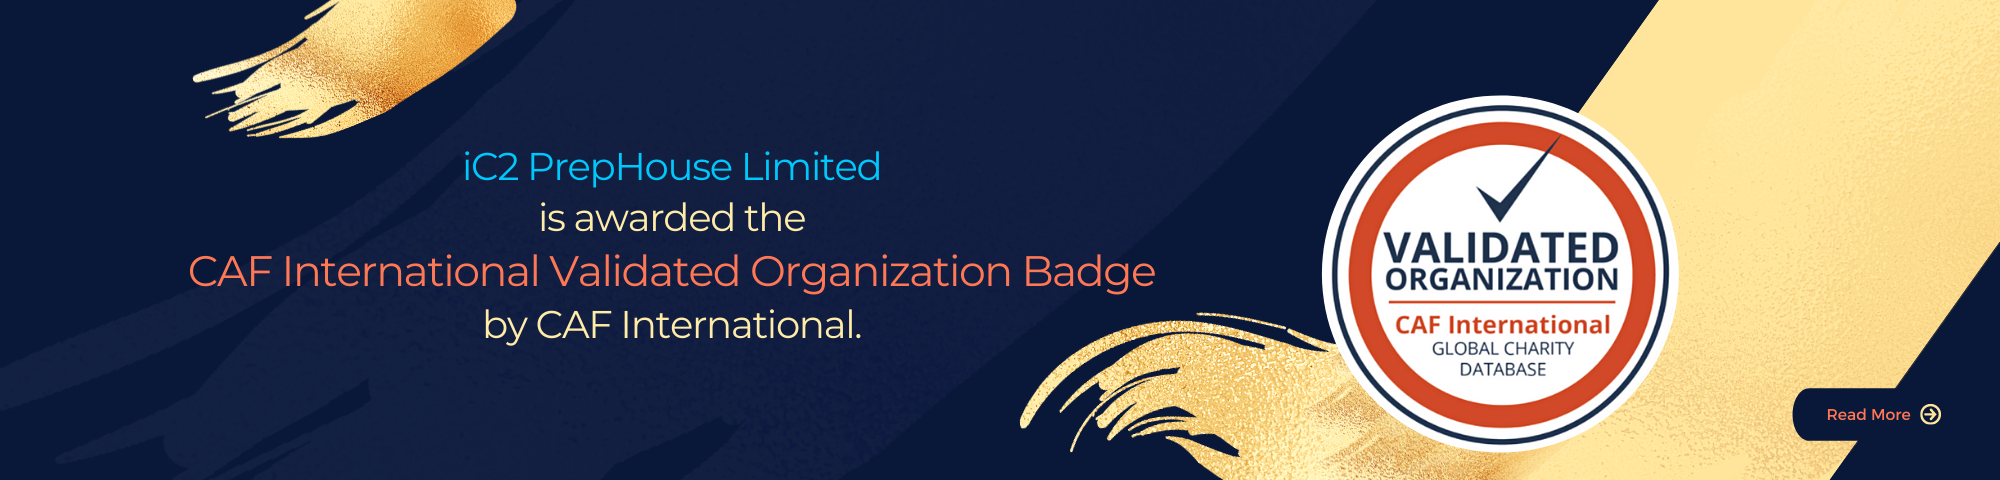 iC2 PrepHouse Limited is awarded the CAF International Validated Organization Badge by CAF International.